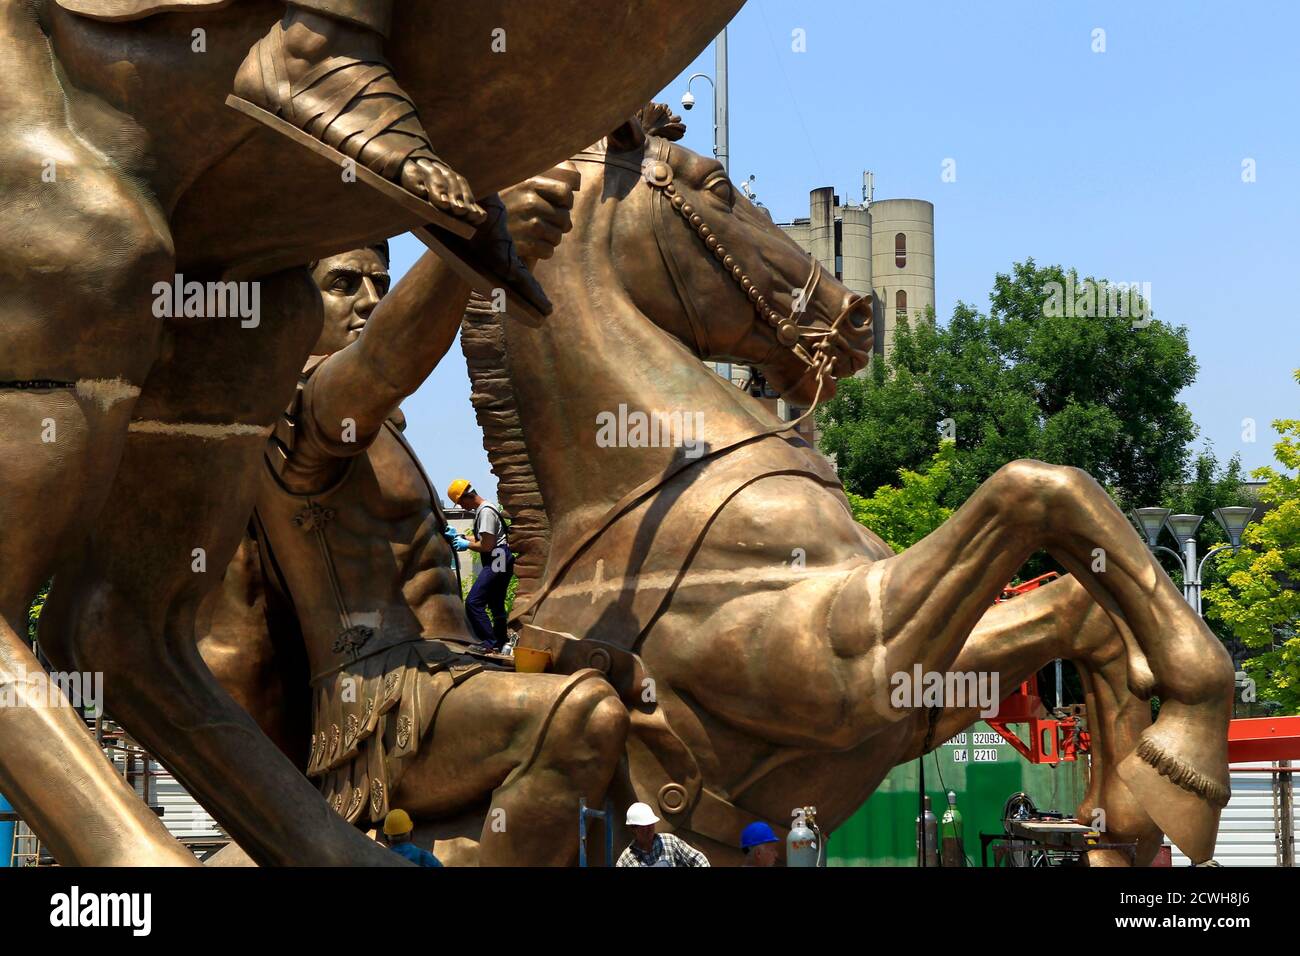 A worker stands on a monument of Alexander the Great on his horse  Bucephalus in Skopje's central city square June 18, 2011.The bronze  installation of 12.5 meters (41 feet) high, standing on